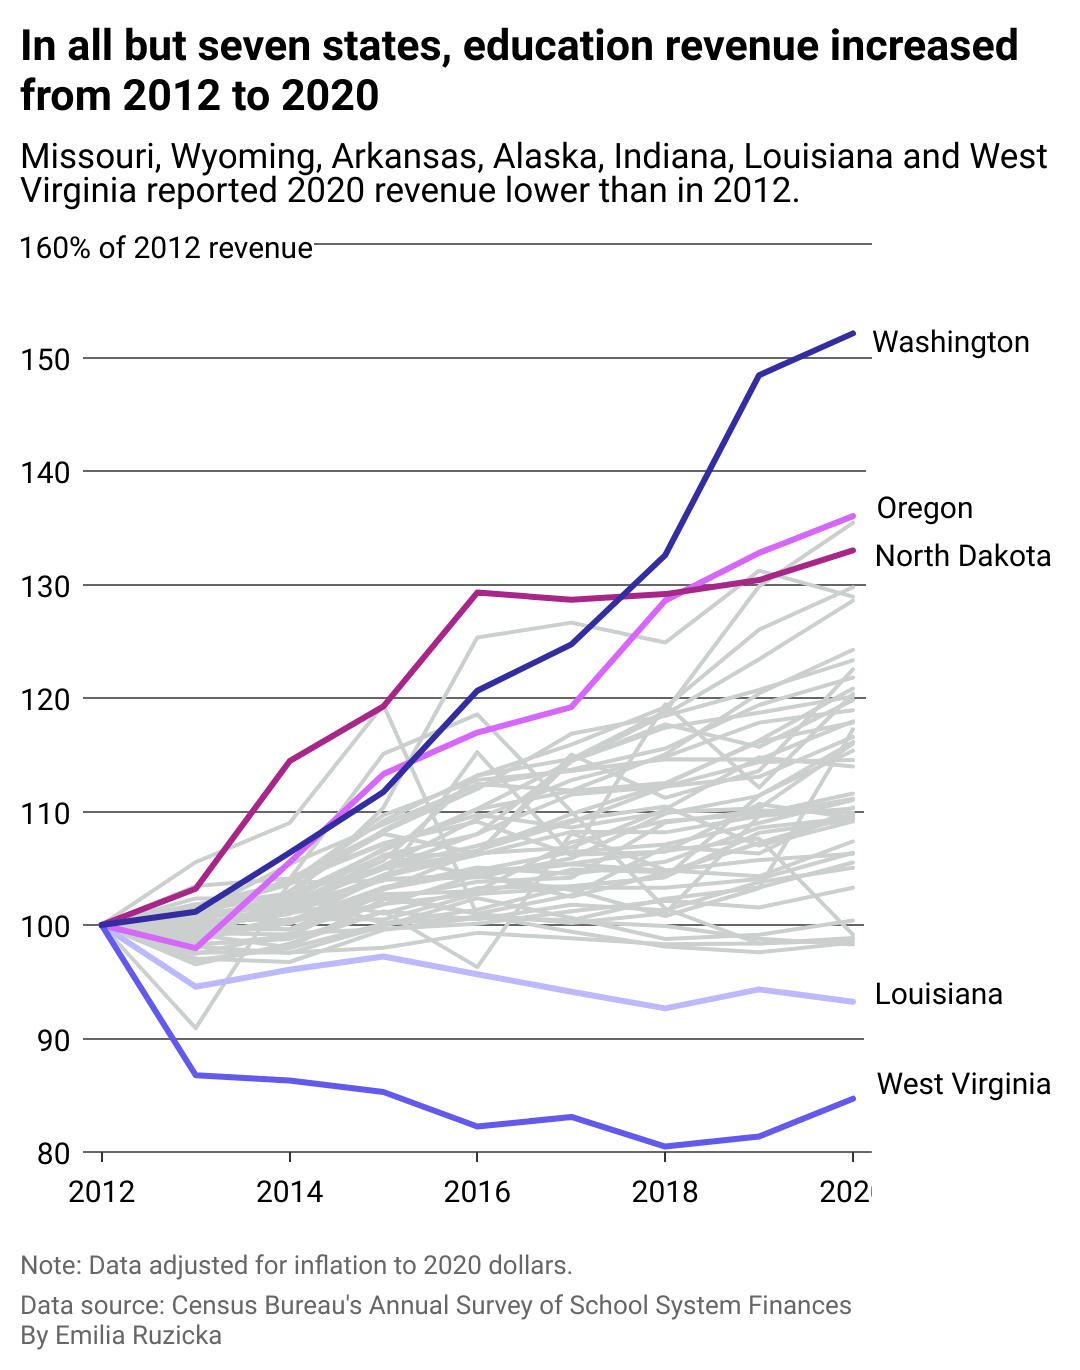 A line chart showing how in all but seven states, education revenue has increased from 2012 to 2020.